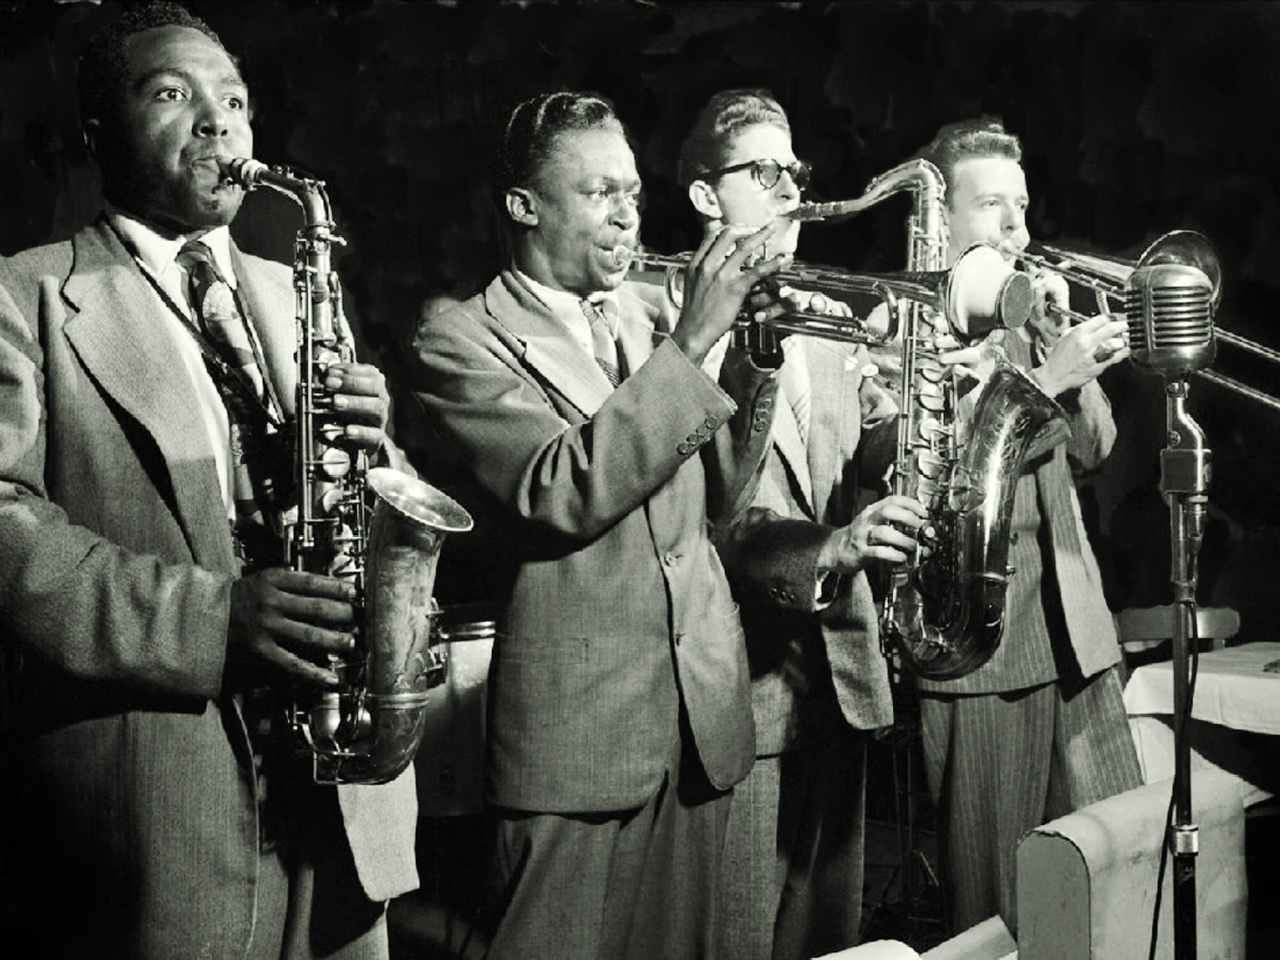 A black and white photograph by Herman Leonard of from left to right Charlie Parker, Miles Davis, Allen Eager, and Kai Winding respectively playing the alto saxophone, trumpet with mute, tenor saxophone, and trombone.